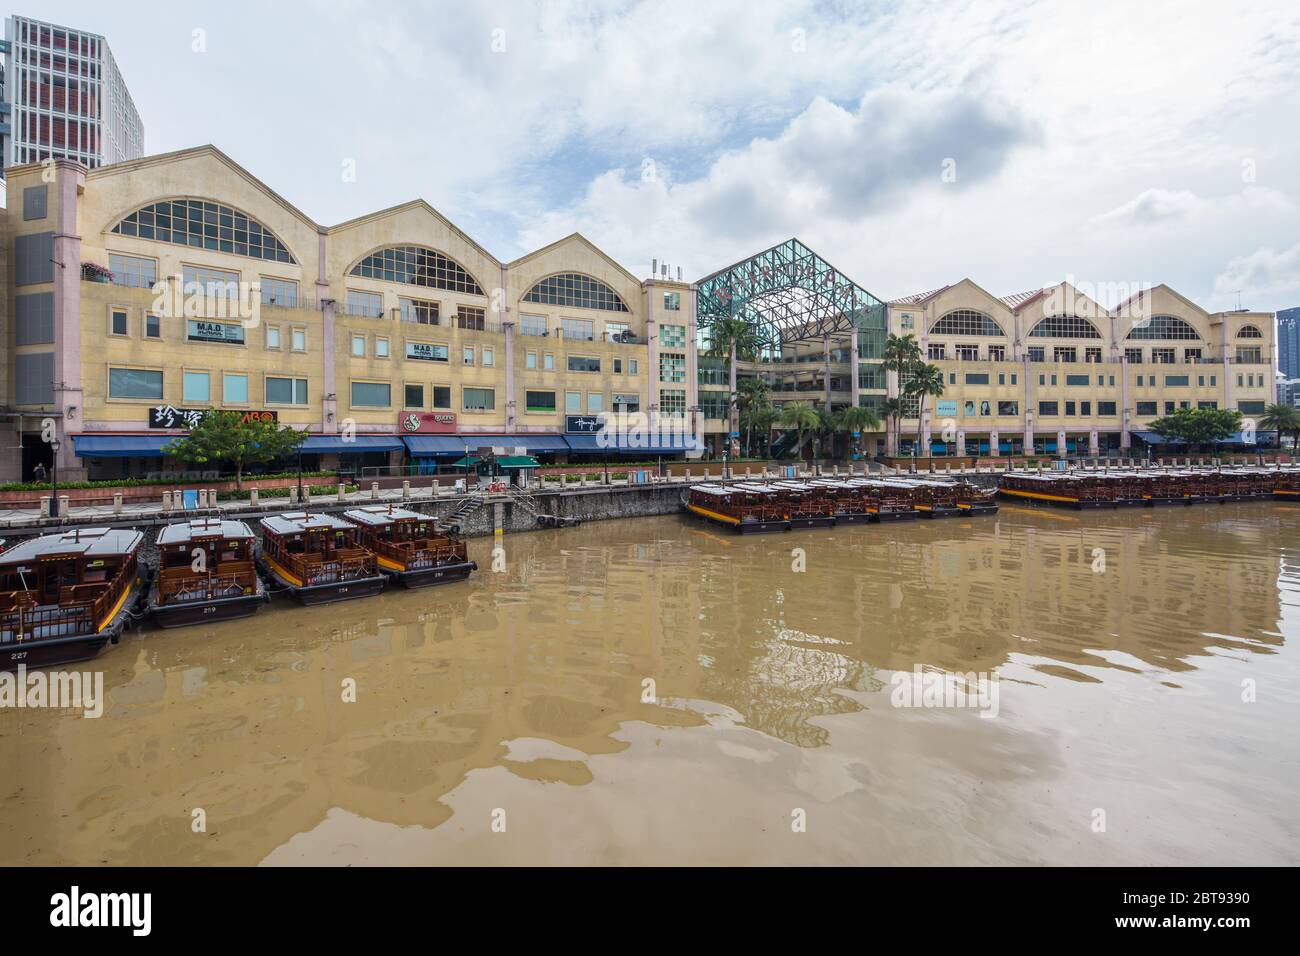 All the bumboats halted because no tourists due to the pandemic outbreak of coronavirus, Singapore Stock Photo